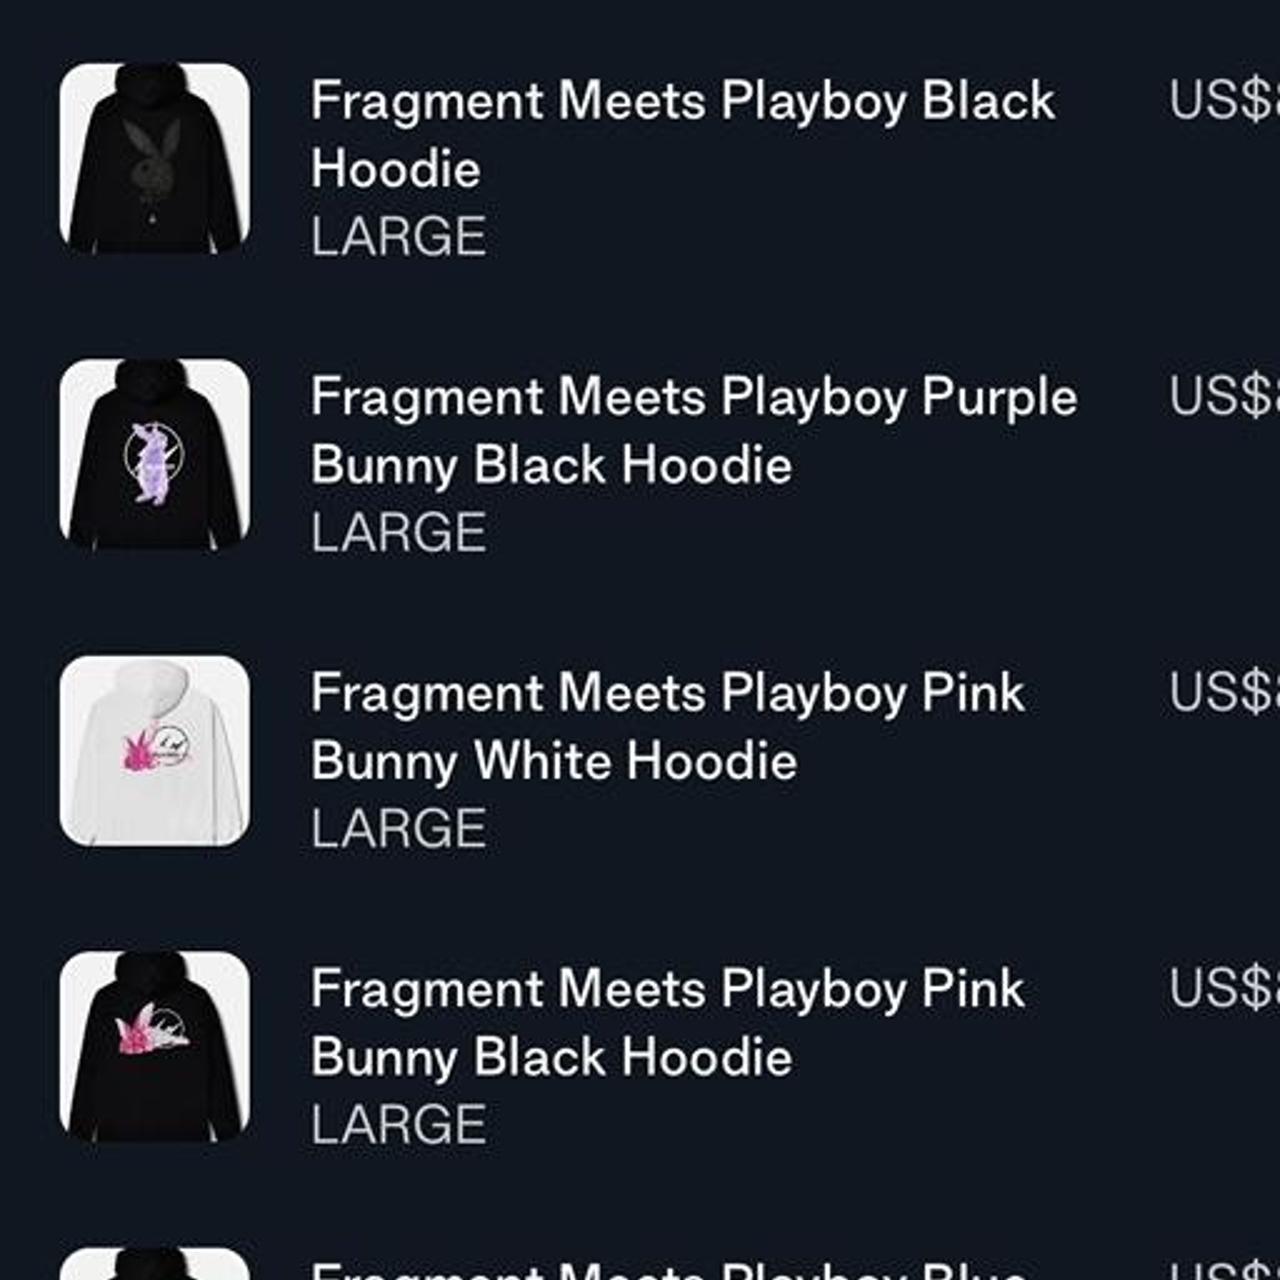 Fragment Meets Playboy Pink Bunny White...